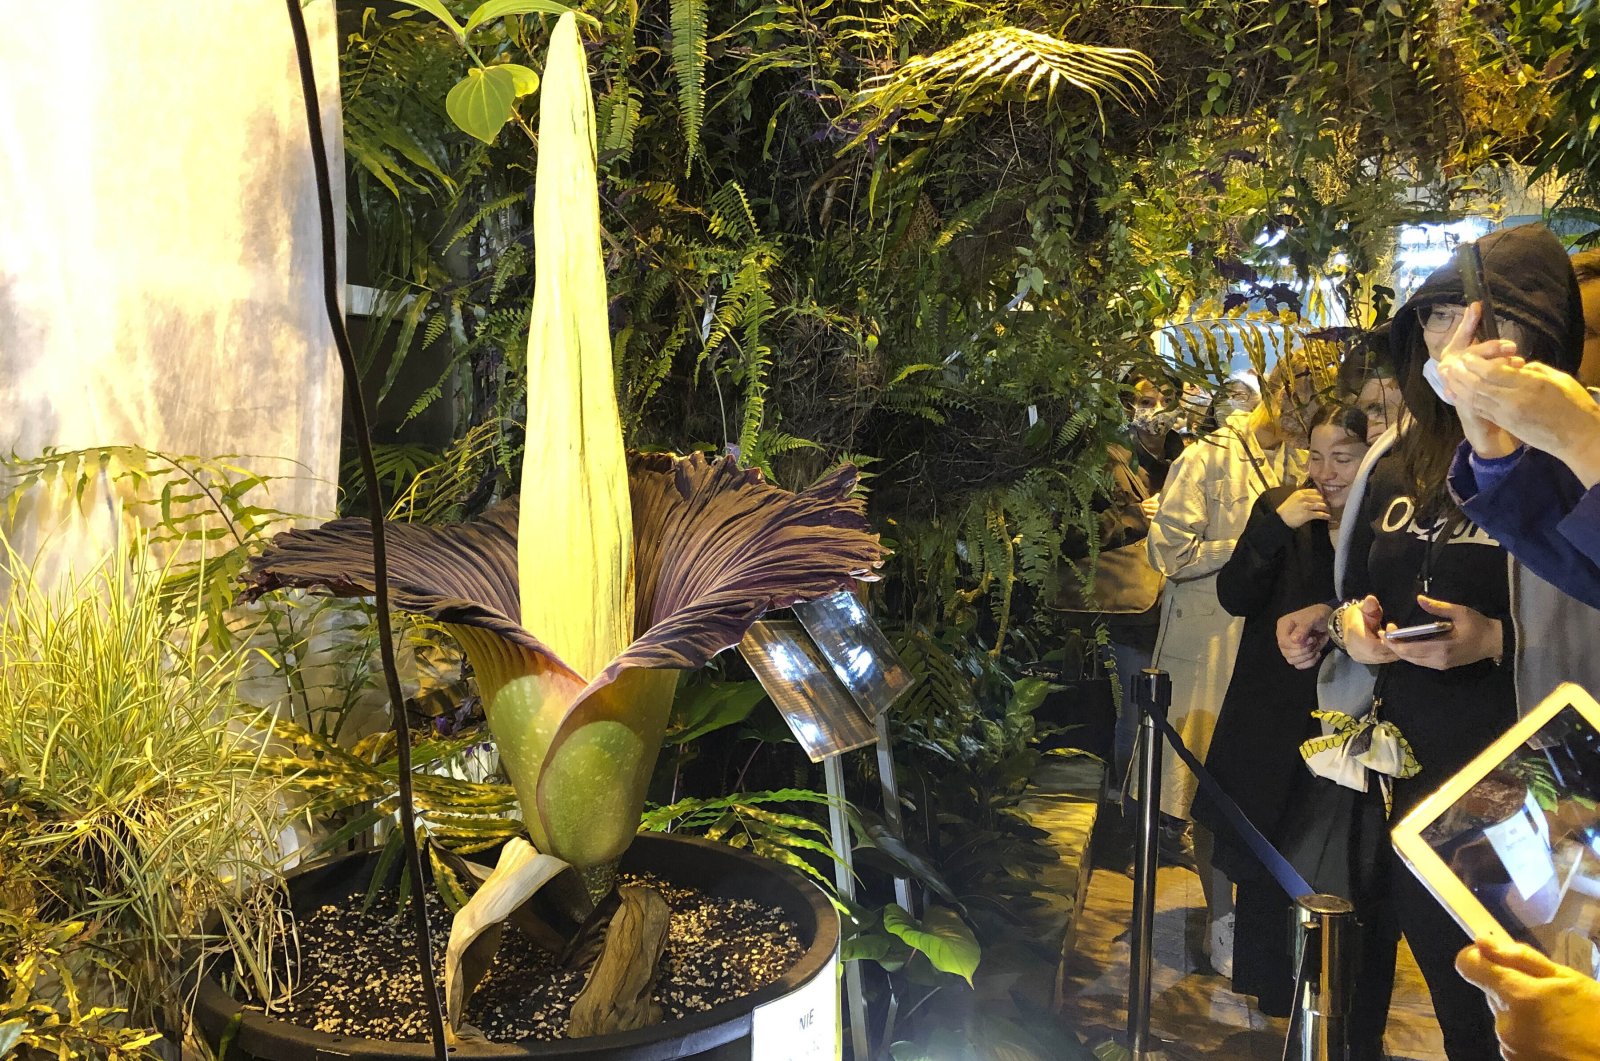 People come to see the rare blooming of the endangered Sumatran Titan arum, or the corpse flower, that is in full bloom for just a few hours, emitting rotten meet odor, at the Warsaw University Botanical Gardens, in Warsaw, Poland, June 13, 2021. (AP Photo)